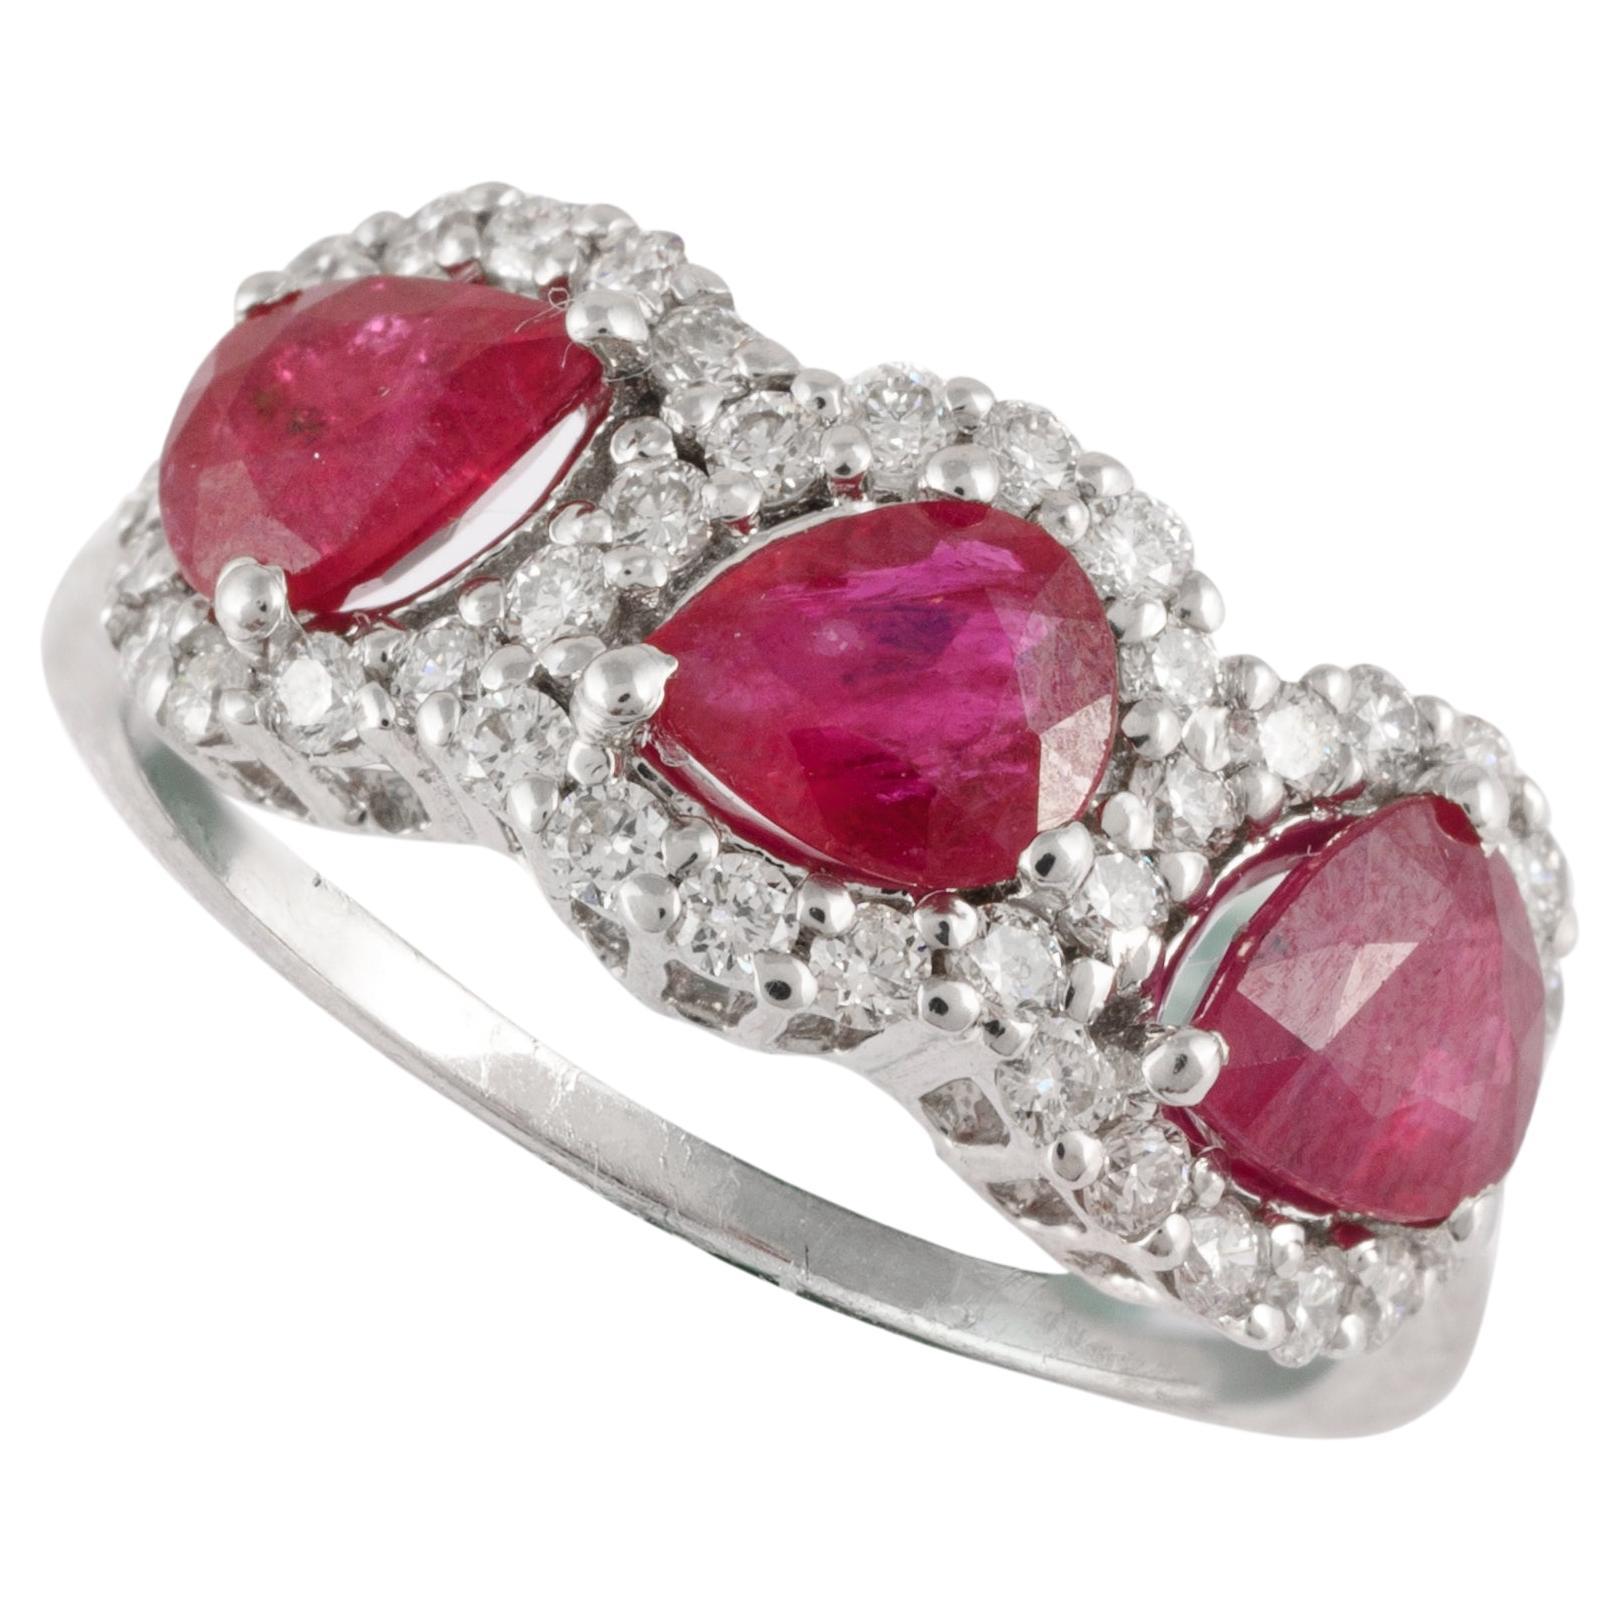 For Sale:  Three Stone Real Ruby Engagement Ring in 18k Solid White Gold with Diamonds